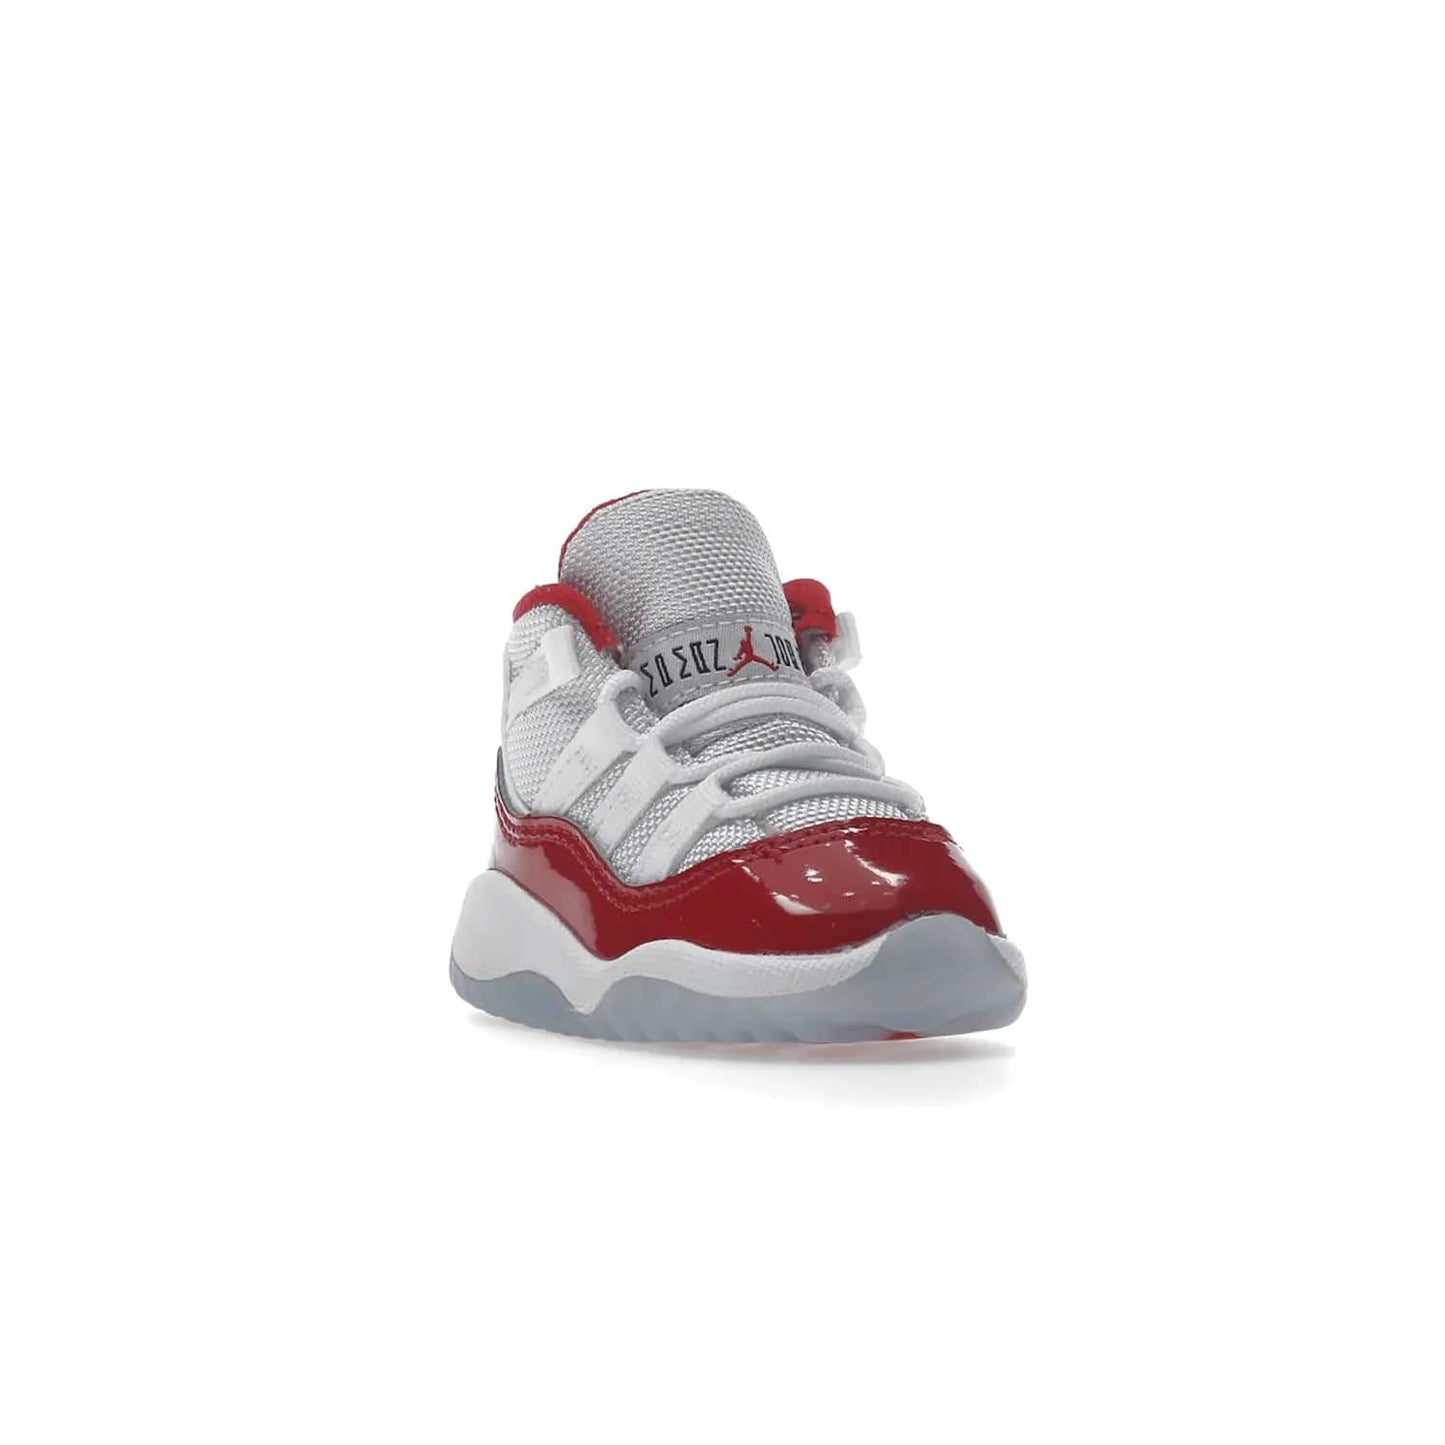 Jordan 11 Retro Cherry (2022) (TD) - Image 7 - Only at www.BallersClubKickz.com - Timeless classic. Air Jordan 11 Retro Cherry 2022 TD combines mesh, leather & suede for a unique look. White upper with varsity red suede. Jumpman logo on collar & tongue. Available Dec 10th, priced at $80.